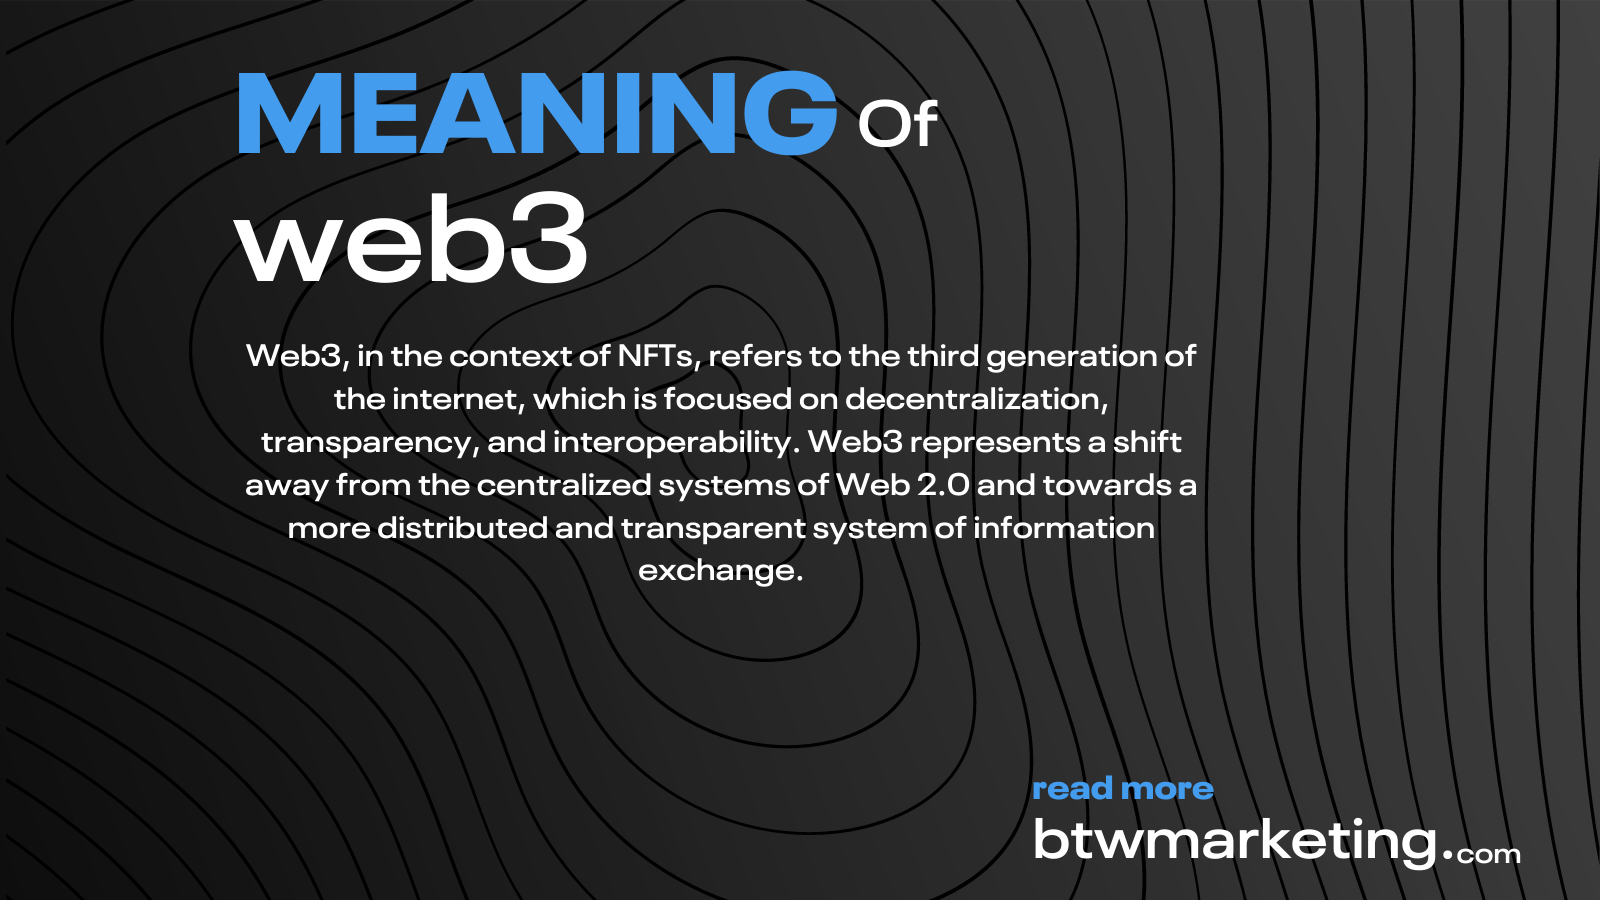 Web3, in the context of NFTs, refers to the third generation of the internet, which is focused on decentralization, transparency, and interoperability. 